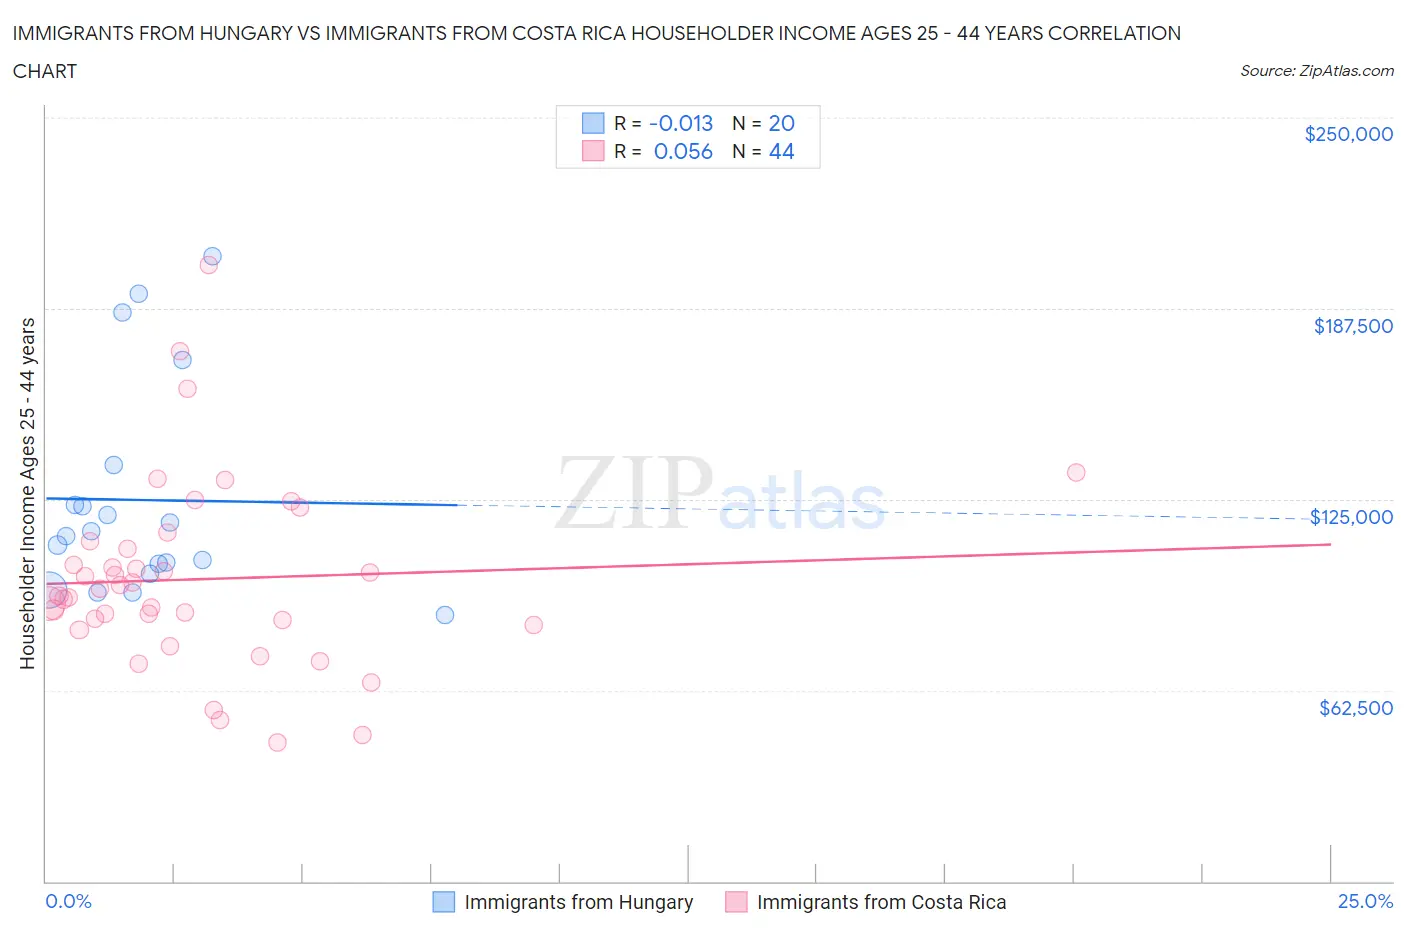 Immigrants from Hungary vs Immigrants from Costa Rica Householder Income Ages 25 - 44 years